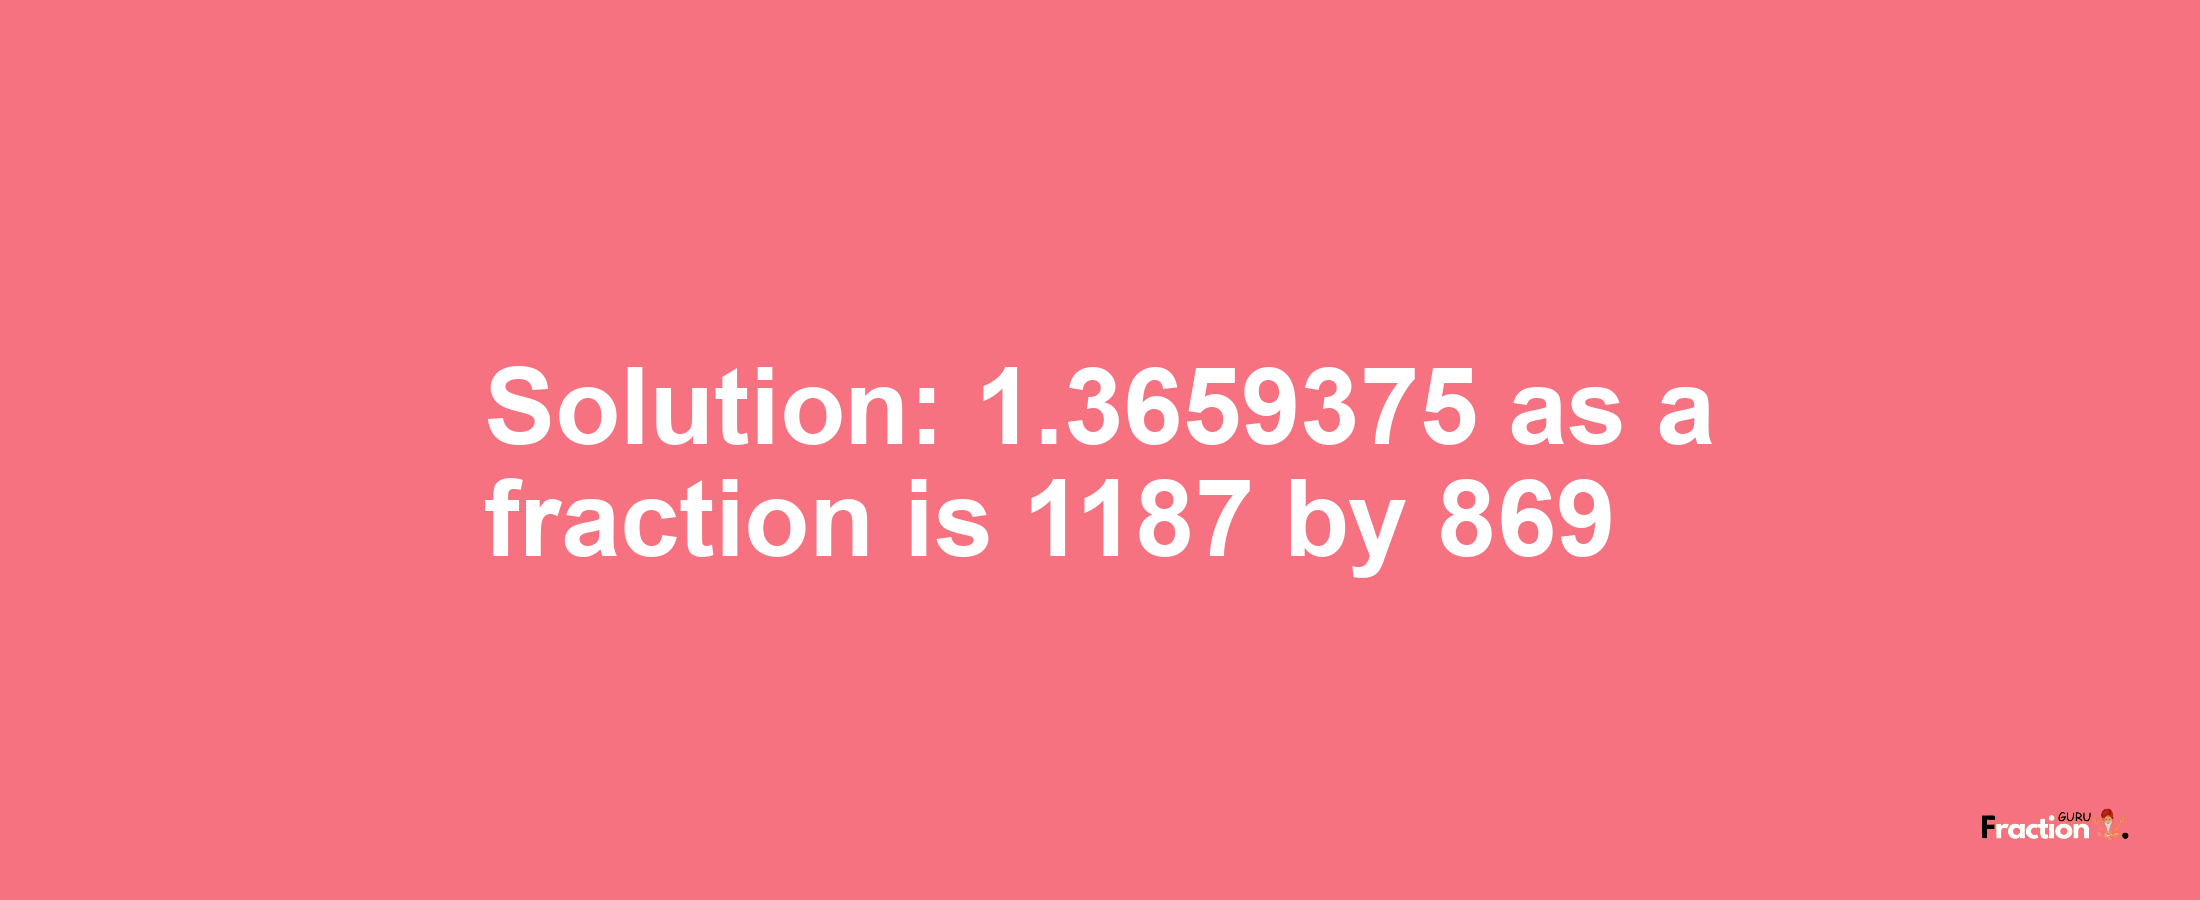 Solution:1.3659375 as a fraction is 1187/869